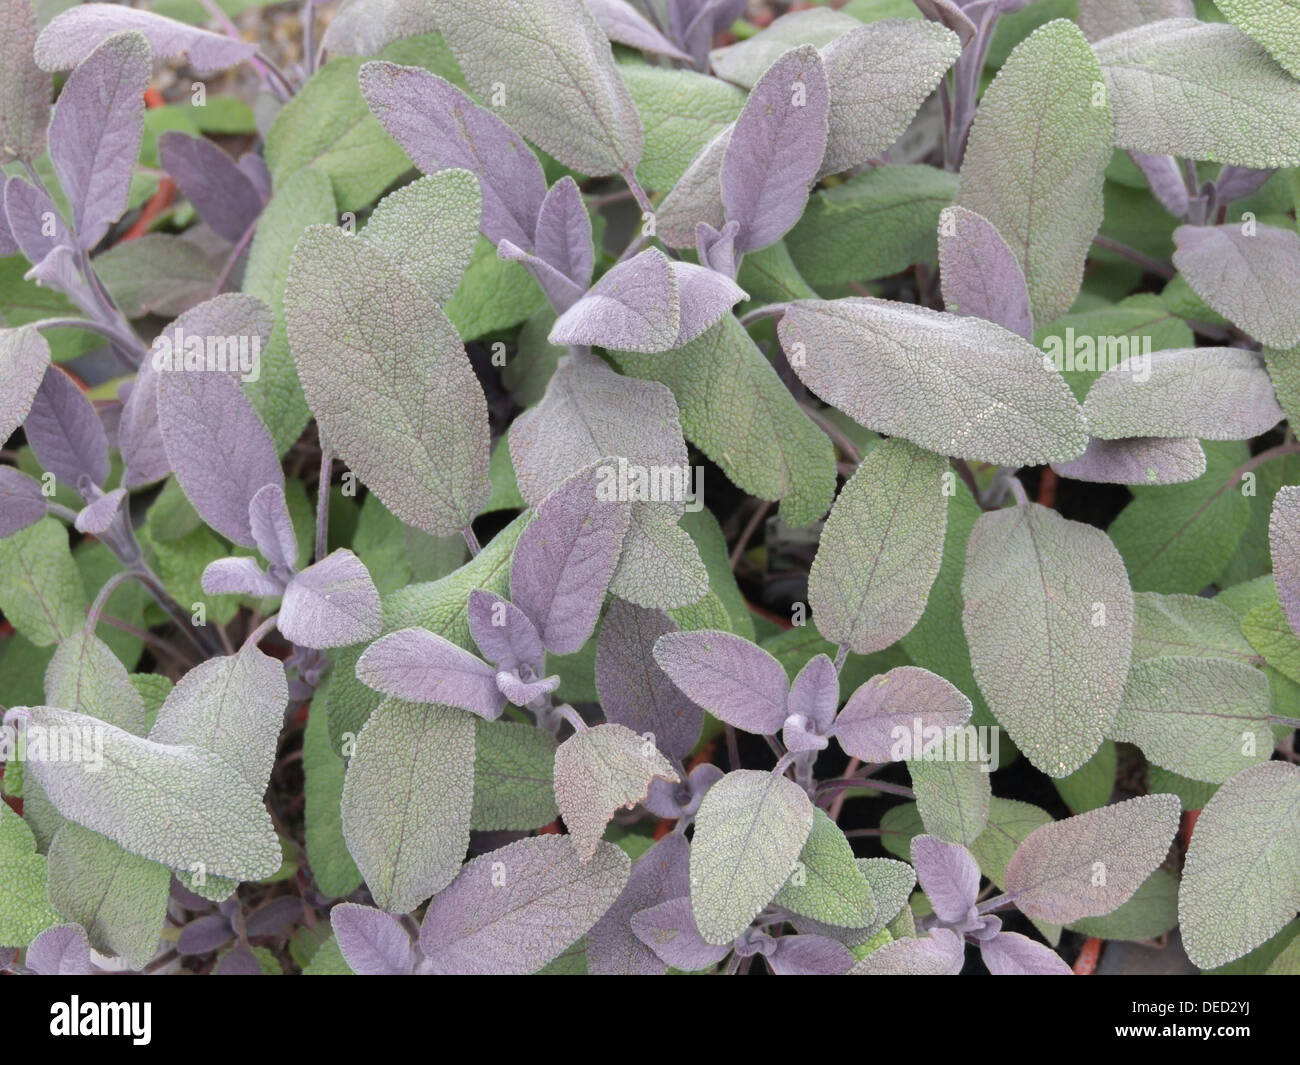 Sage plants Salvia officinalis 'Purple Beauty' for sale in a garden centre Stock Photo